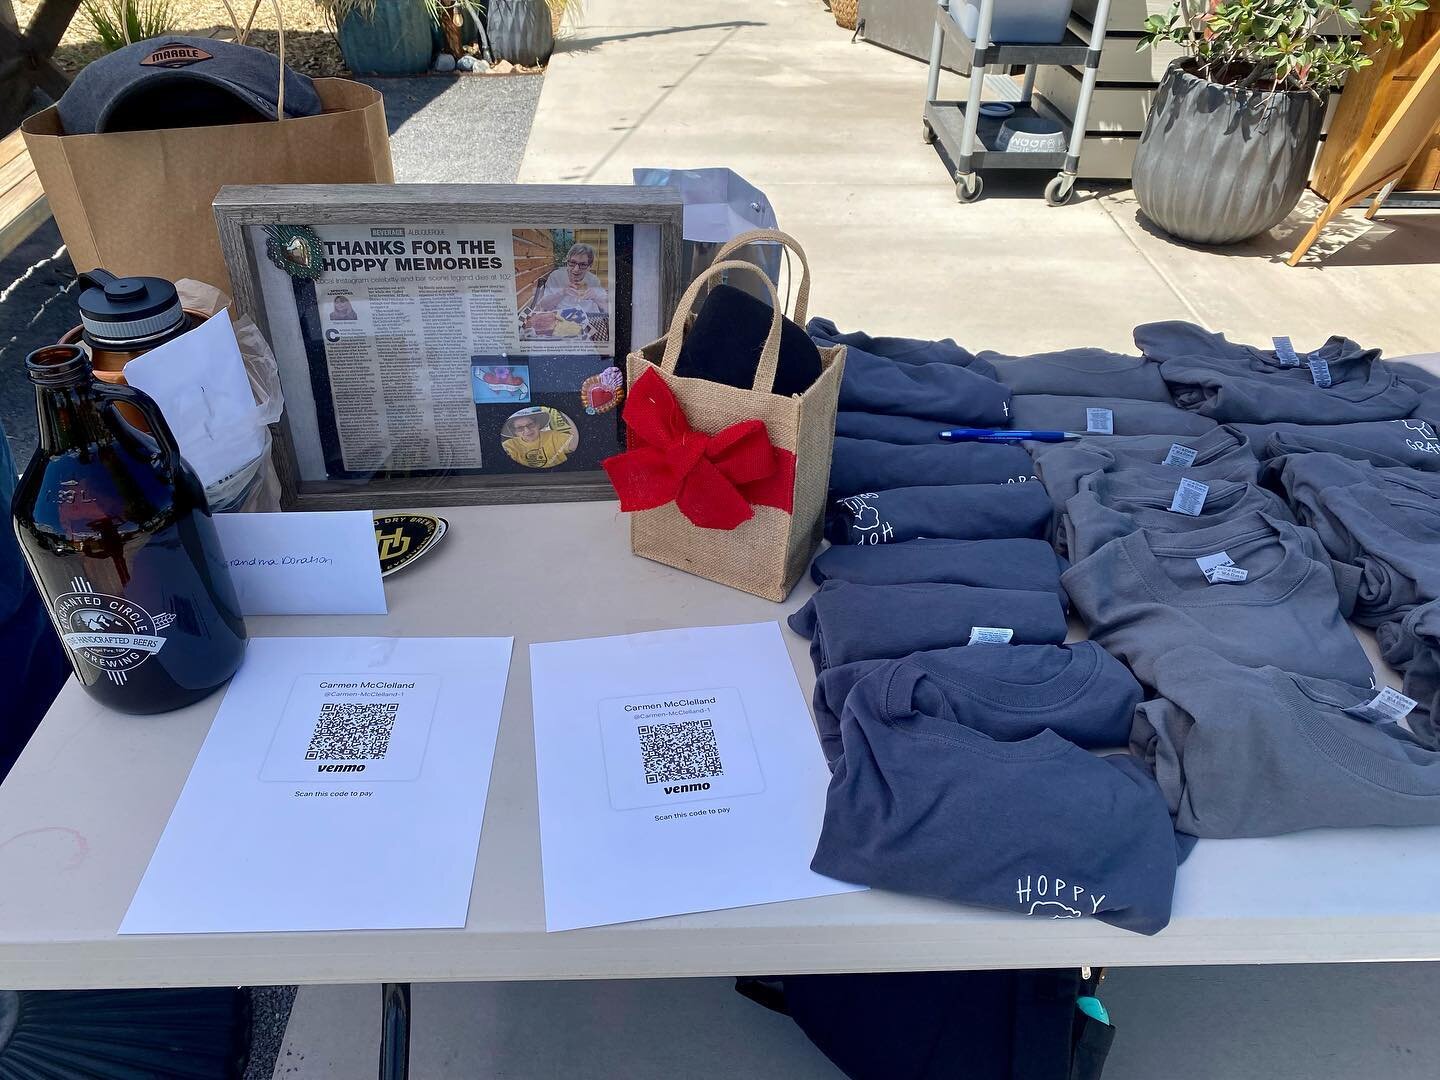 Come down to @exnovobrew_nm for the launch of the Hoppy Grandma Scholarship!! We have t-shirts and raffle prizes from @exnovobrew_nm @steelbenderbrewyard @marblebrewery @enchantedcircle505 @resourcebrewingco @nexusbrewery